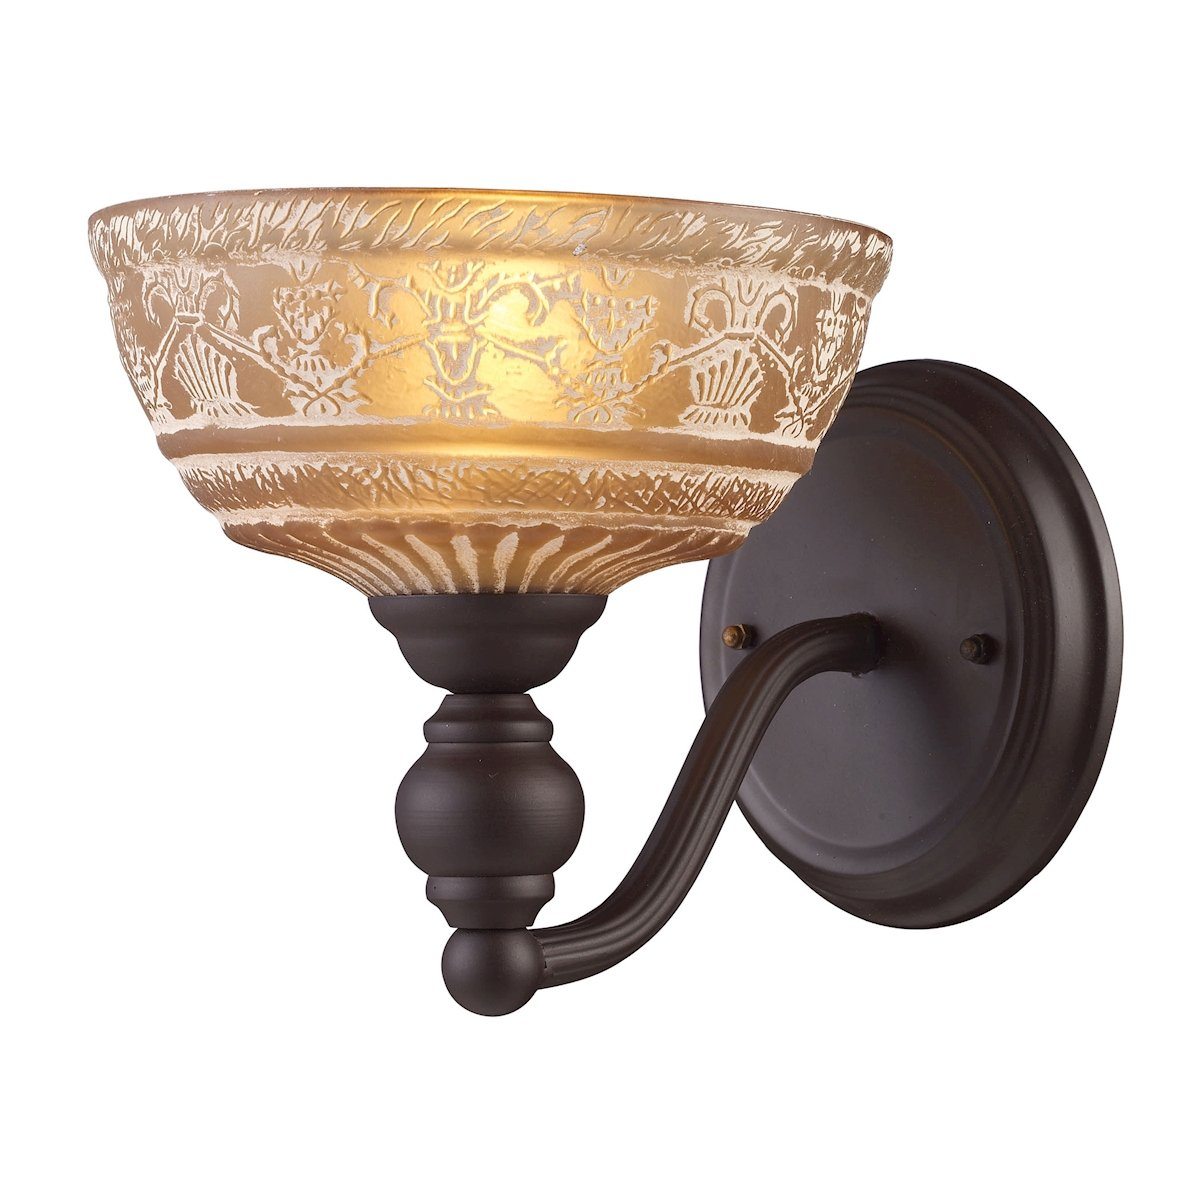 Norwich 1 Light Wall Sconce In Oiled Bronze And Amber Glass Wall Sconce Elk Lighting 